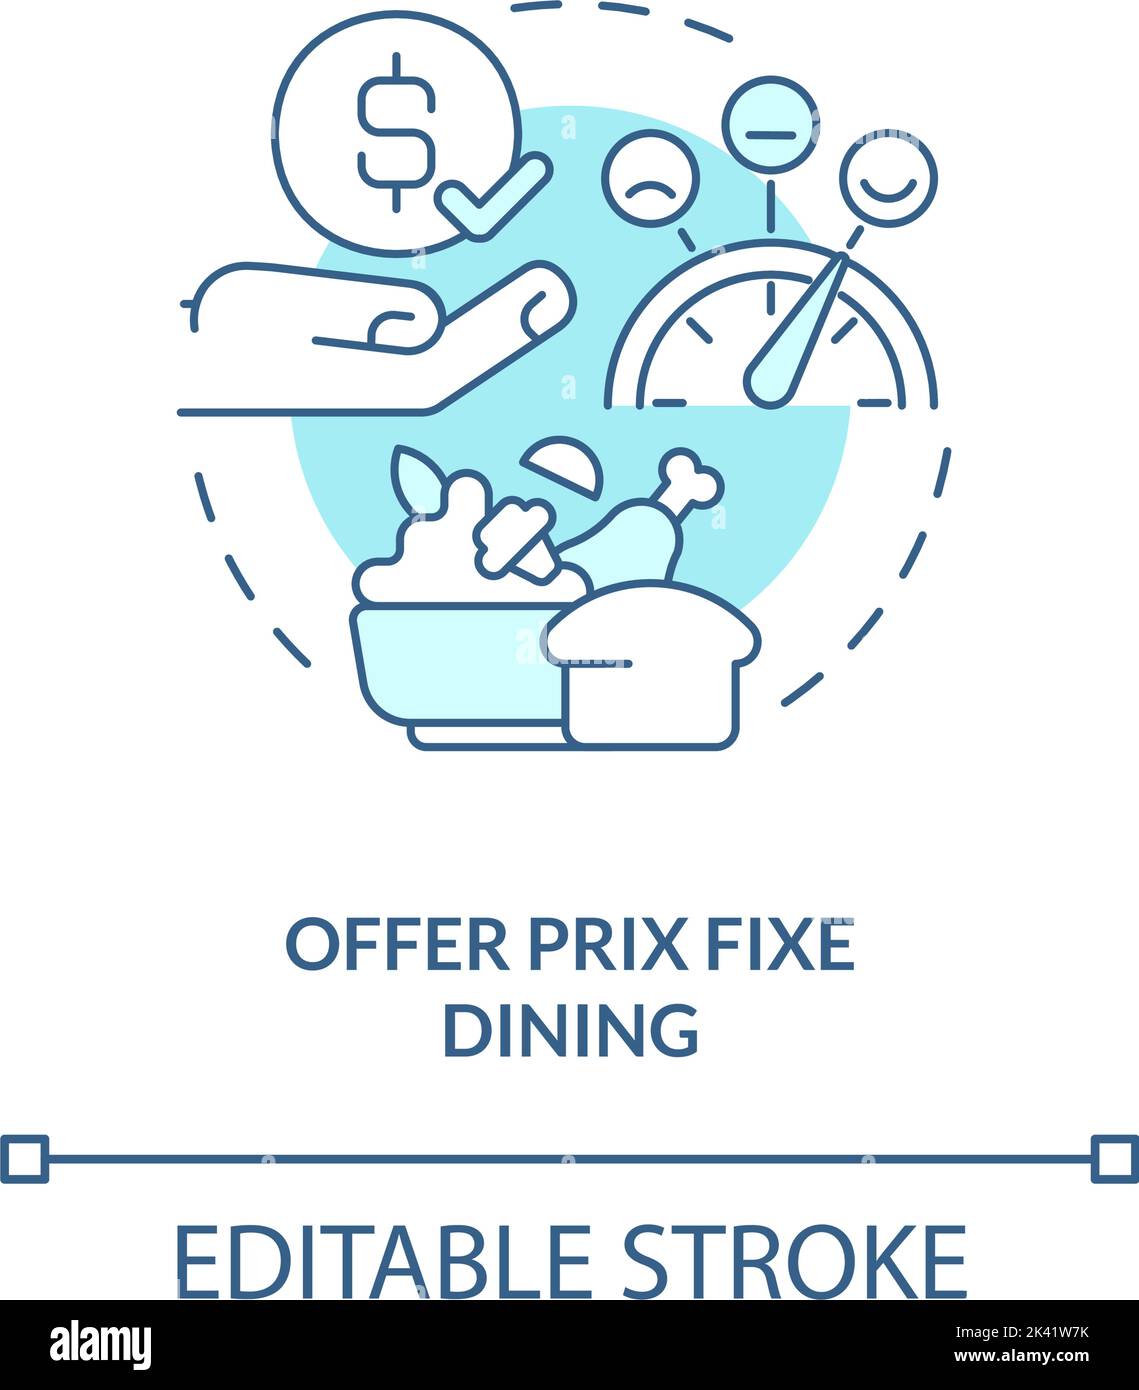 Offer prix fixe dining turquoise concept icon Stock Vector